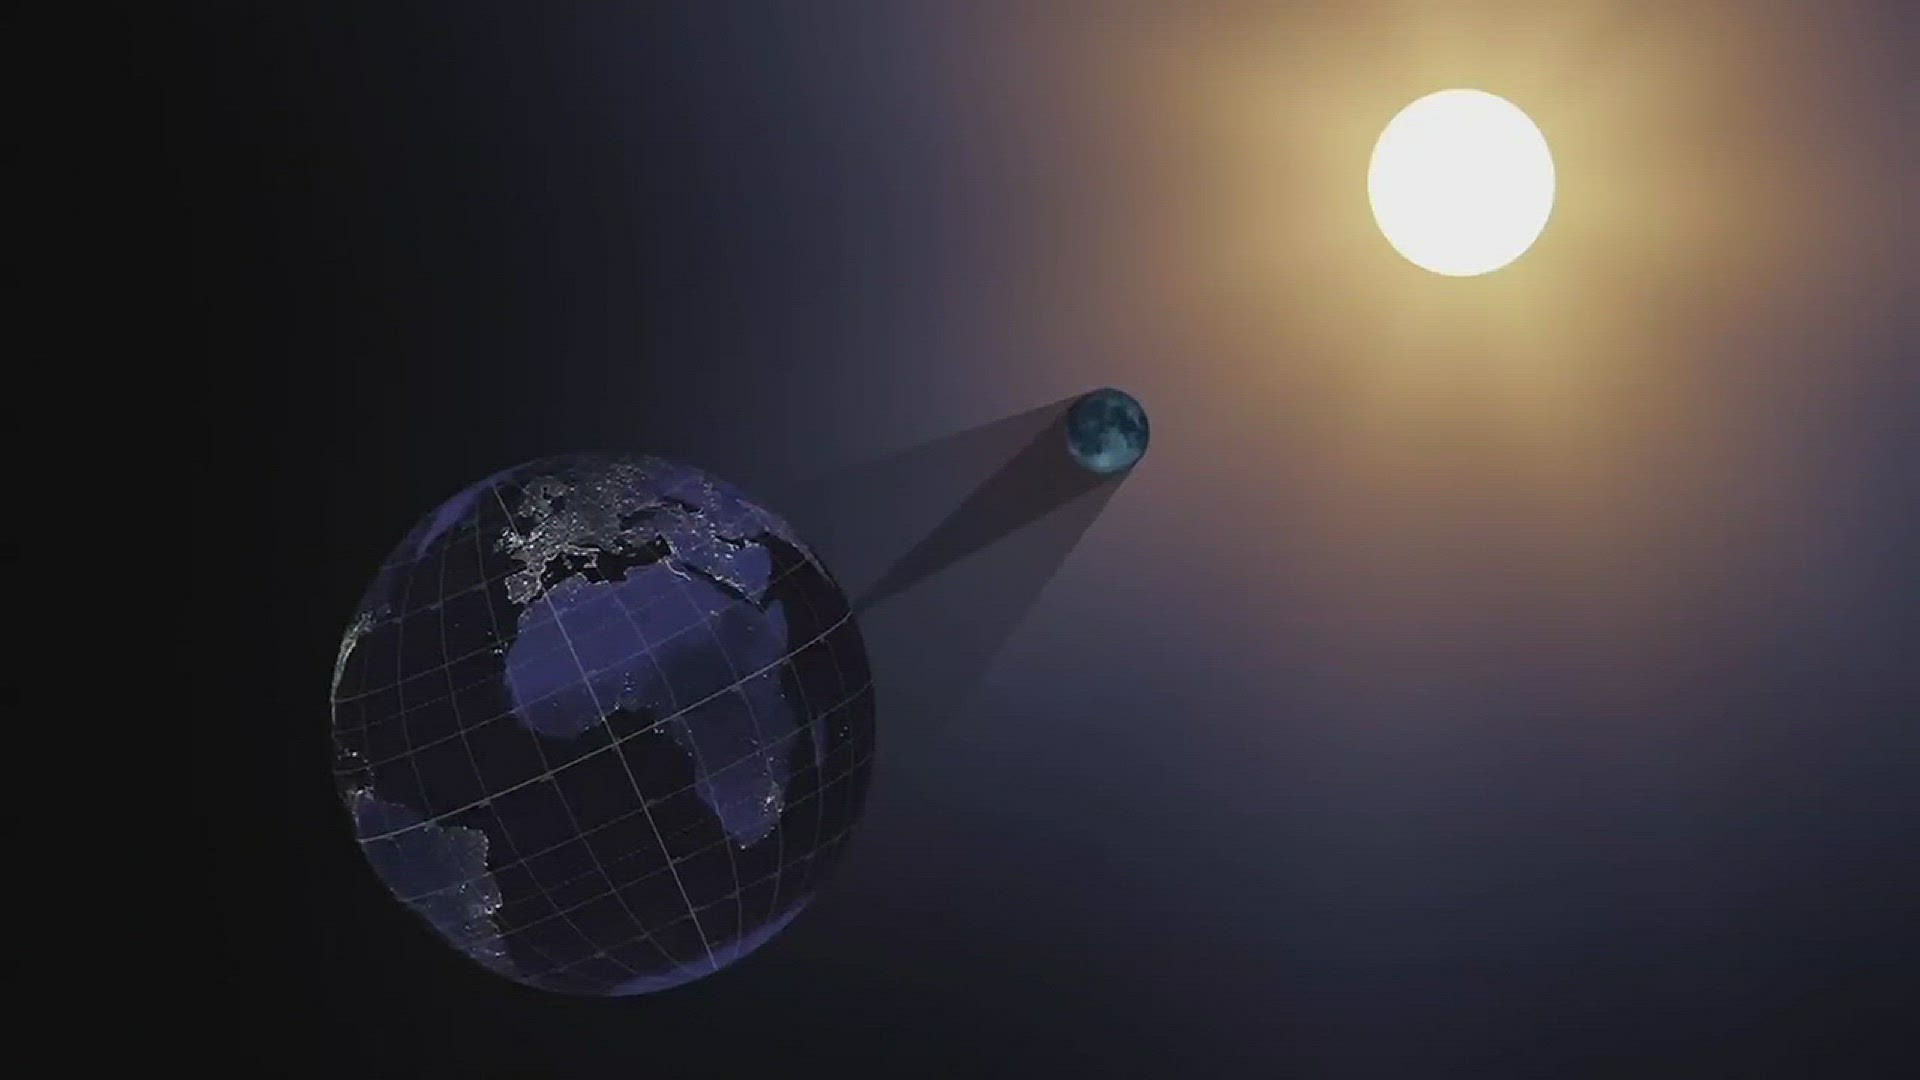 A rare solar eclipse will be taking place overnight.